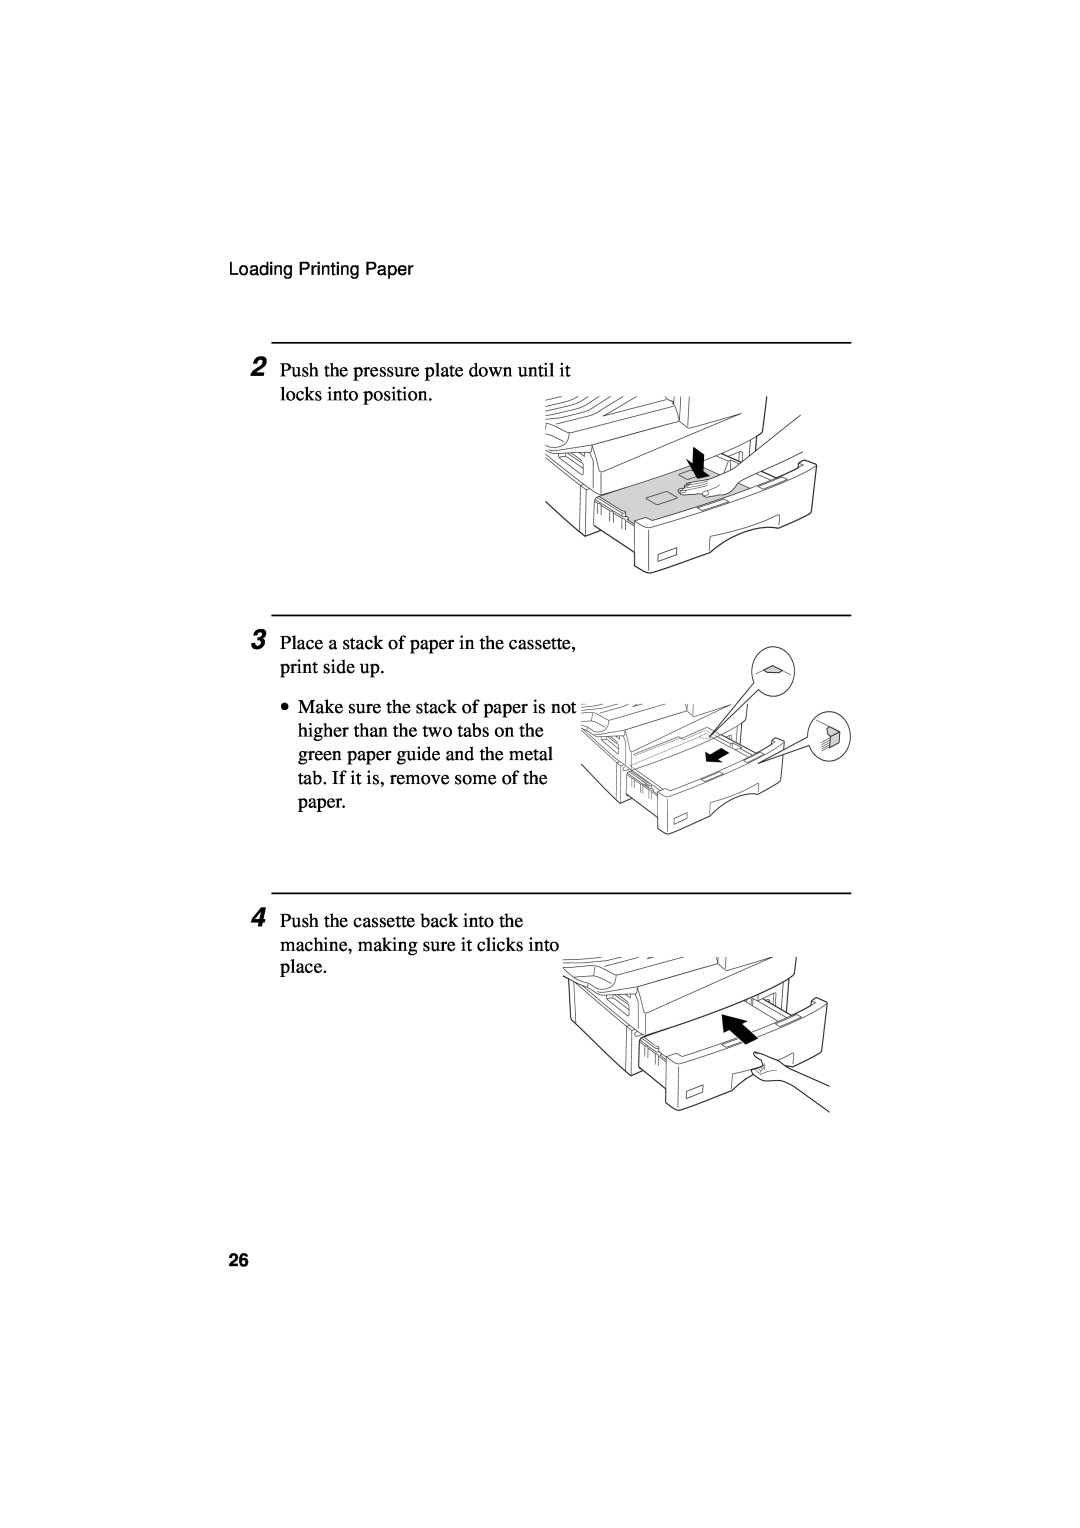 Sharp FO-4700, FO-5700 Push the pressure plate down until it locks into position, ∙ Make sure the stack of paper is not 